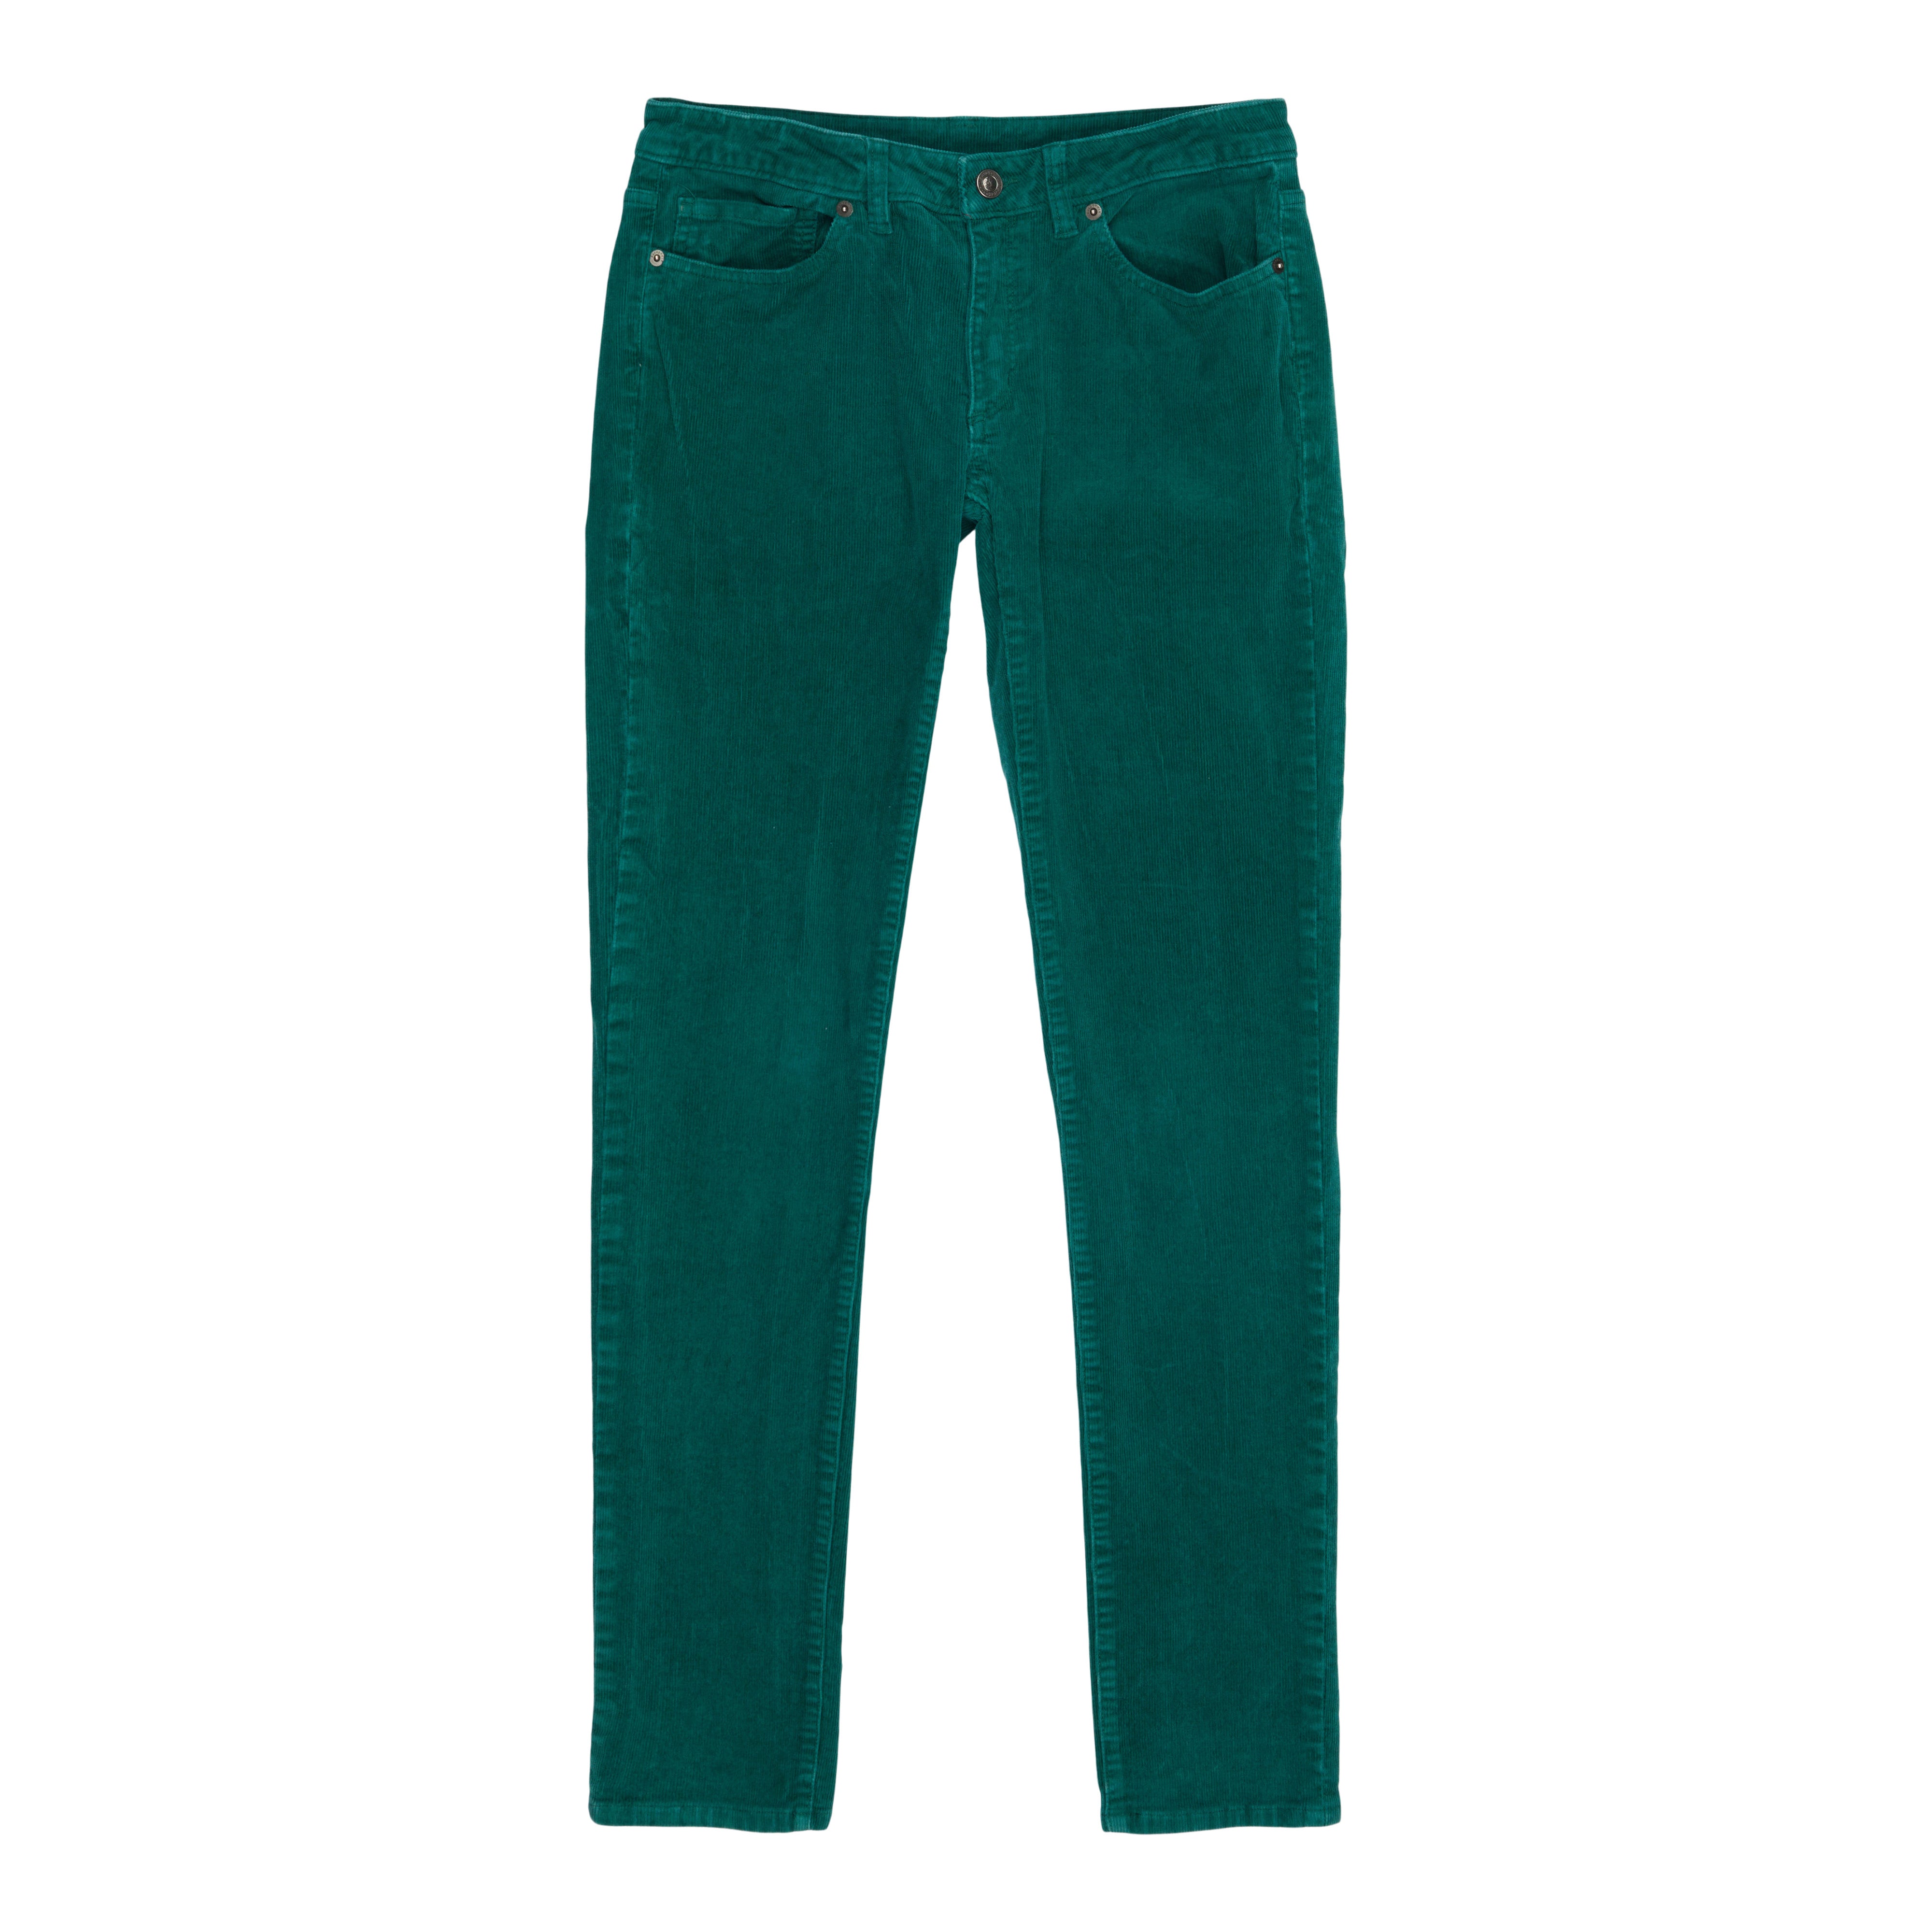 Patagonia Fitted Corduroy Pant - Women's - Clothing